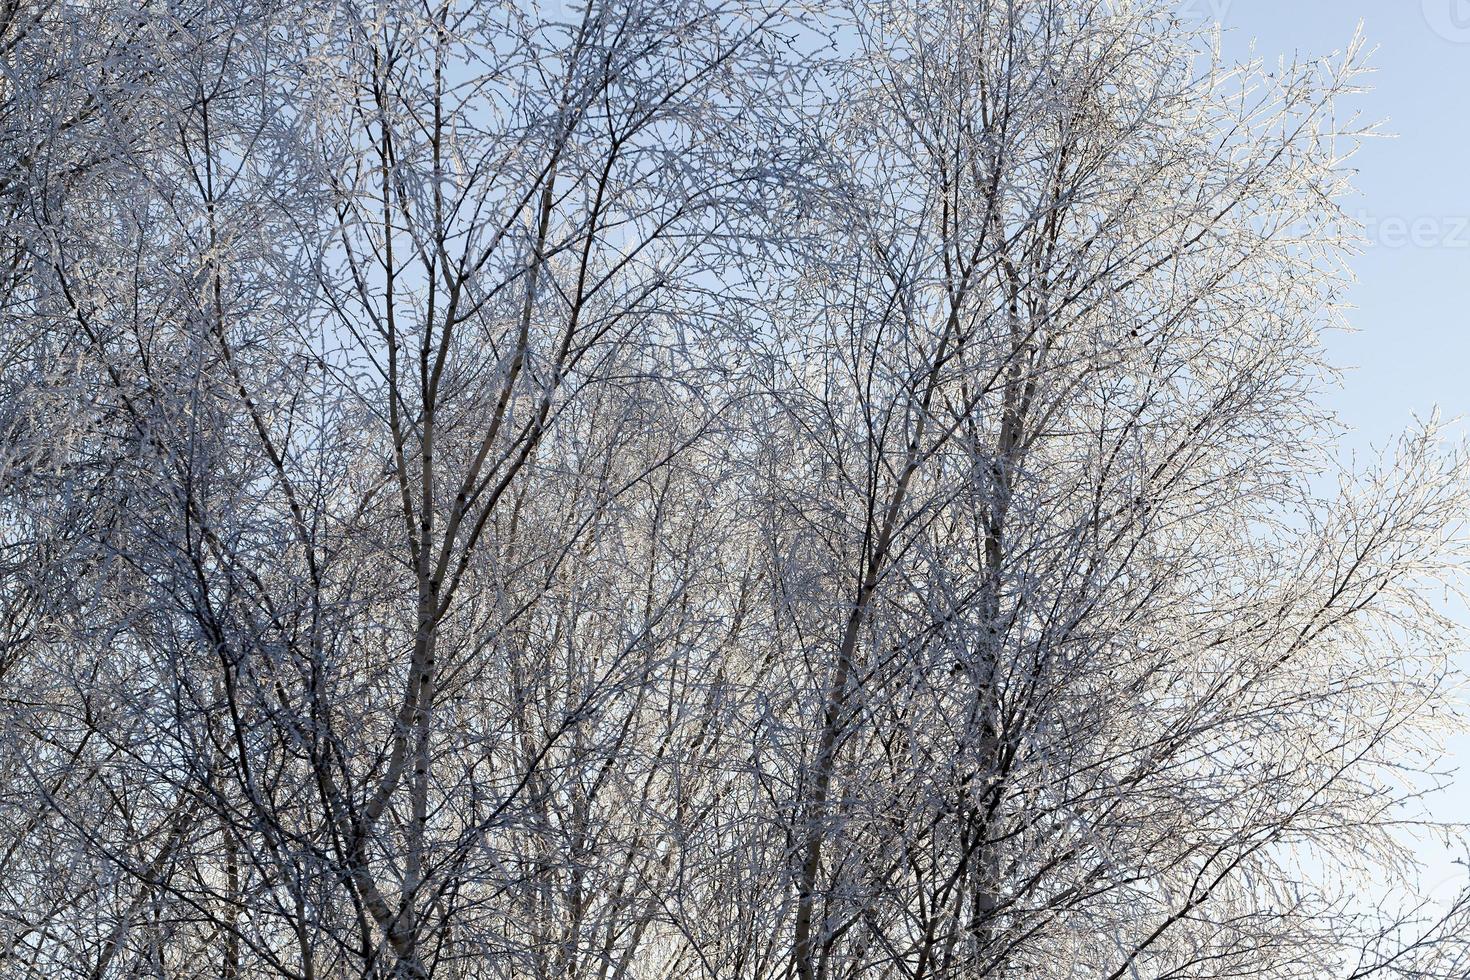 Frost on tree branches photo